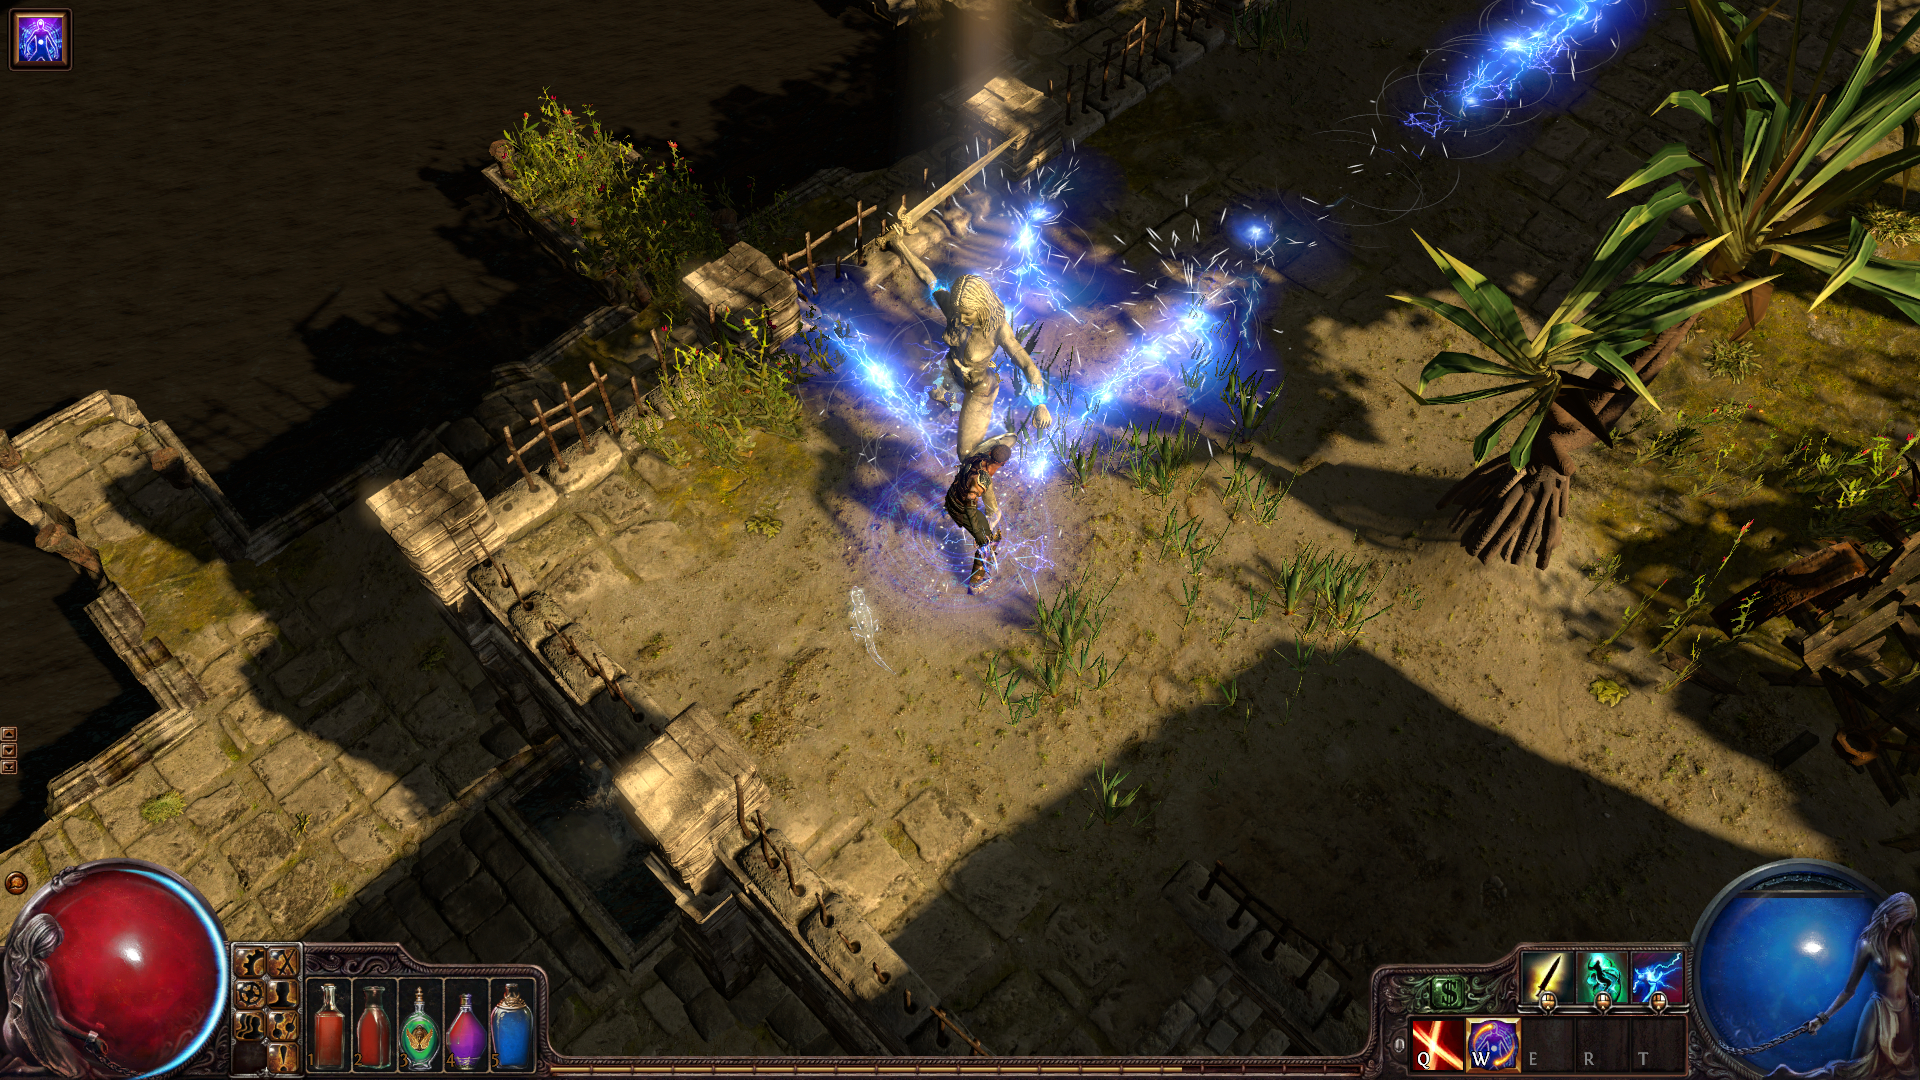 Path of exile некрополь. Path of Exile Скриншоты. Слива Титуса Path of Exile. Кейкап Path of Exile. Path of Exile 2 screenshot.